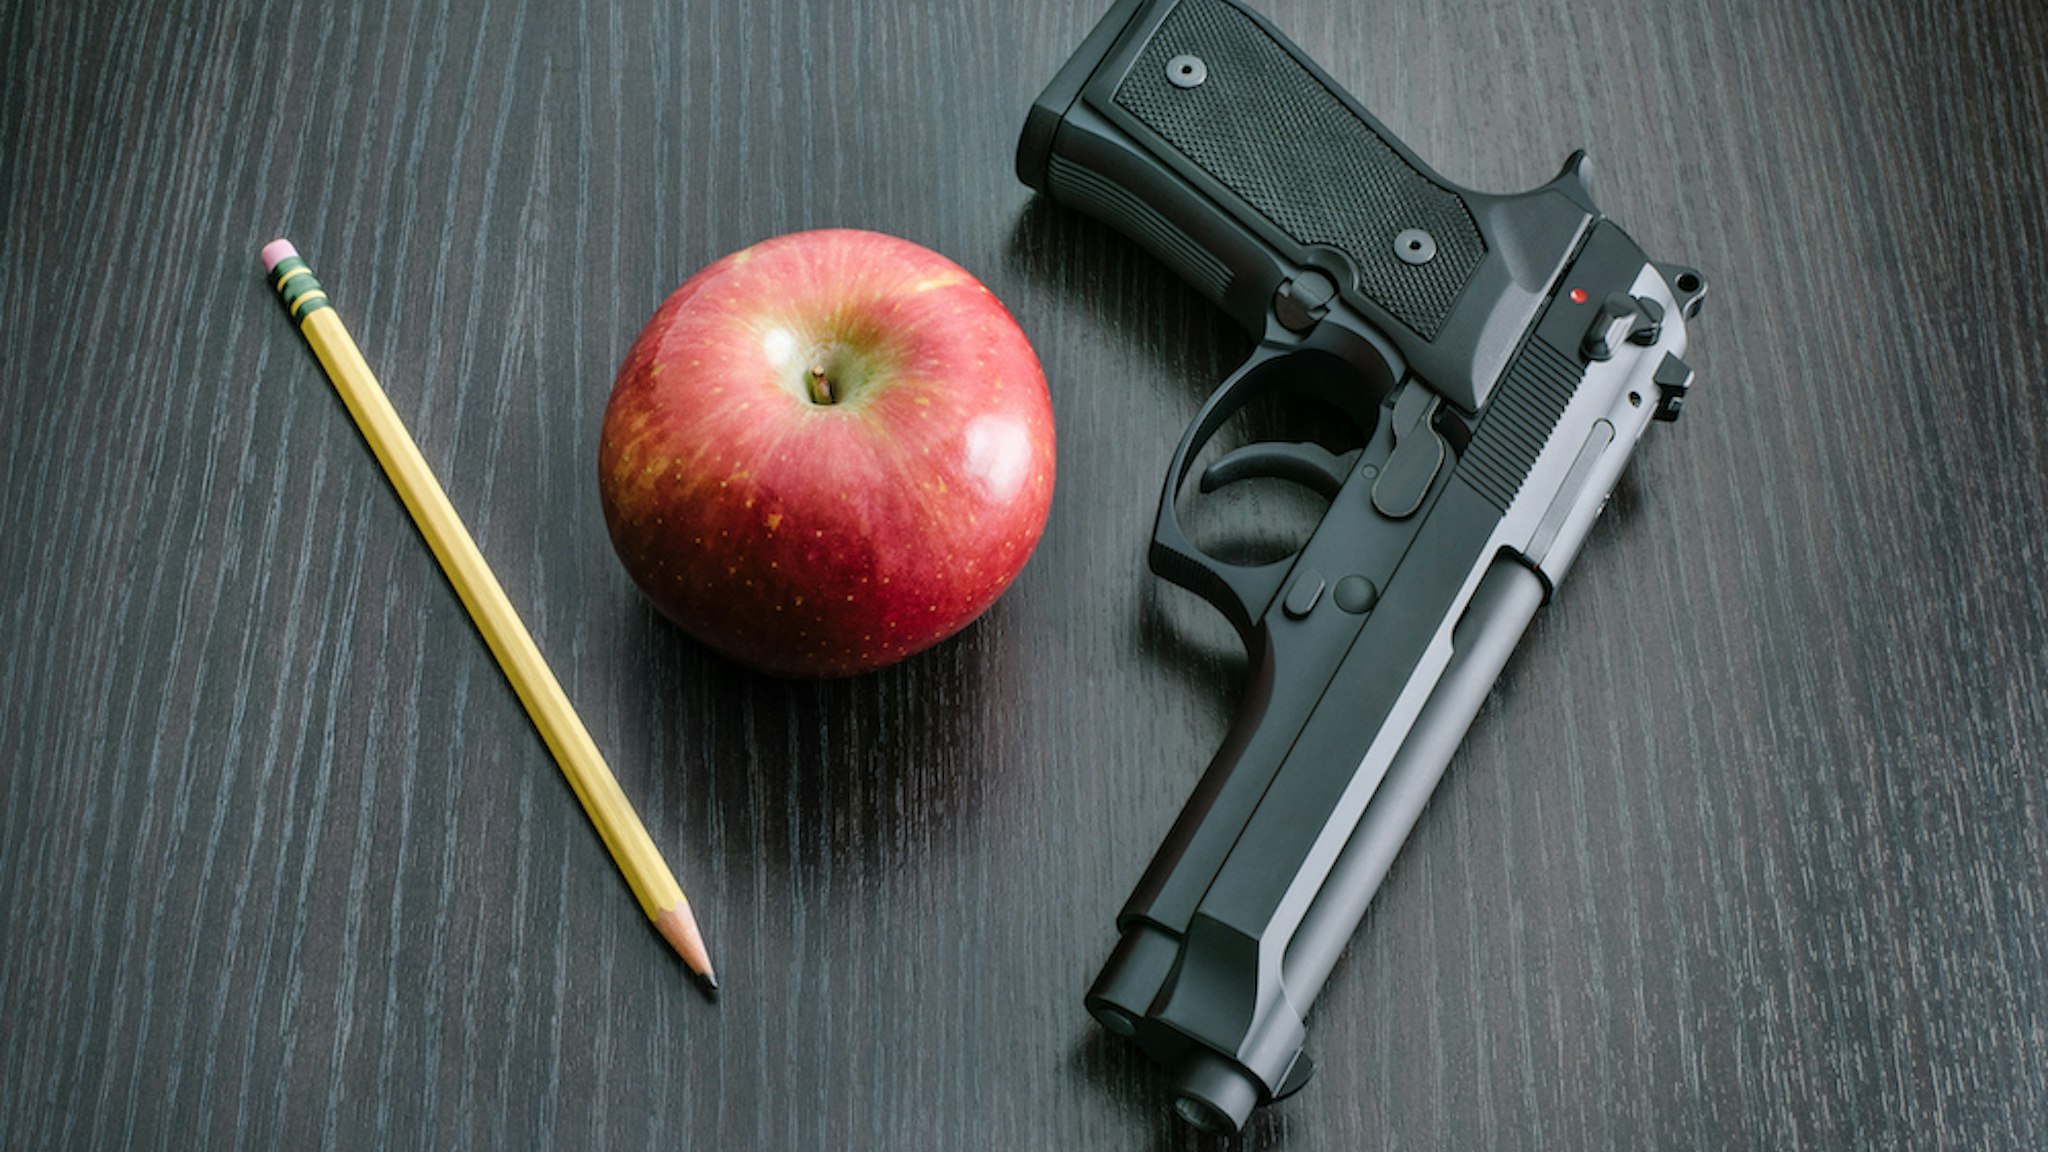 9mm Beretta 92FS type handgun with apple and pencil depicting the question whether to arm teachers in the classroom to defend students against active shooters. (kenlh/Getty Images)